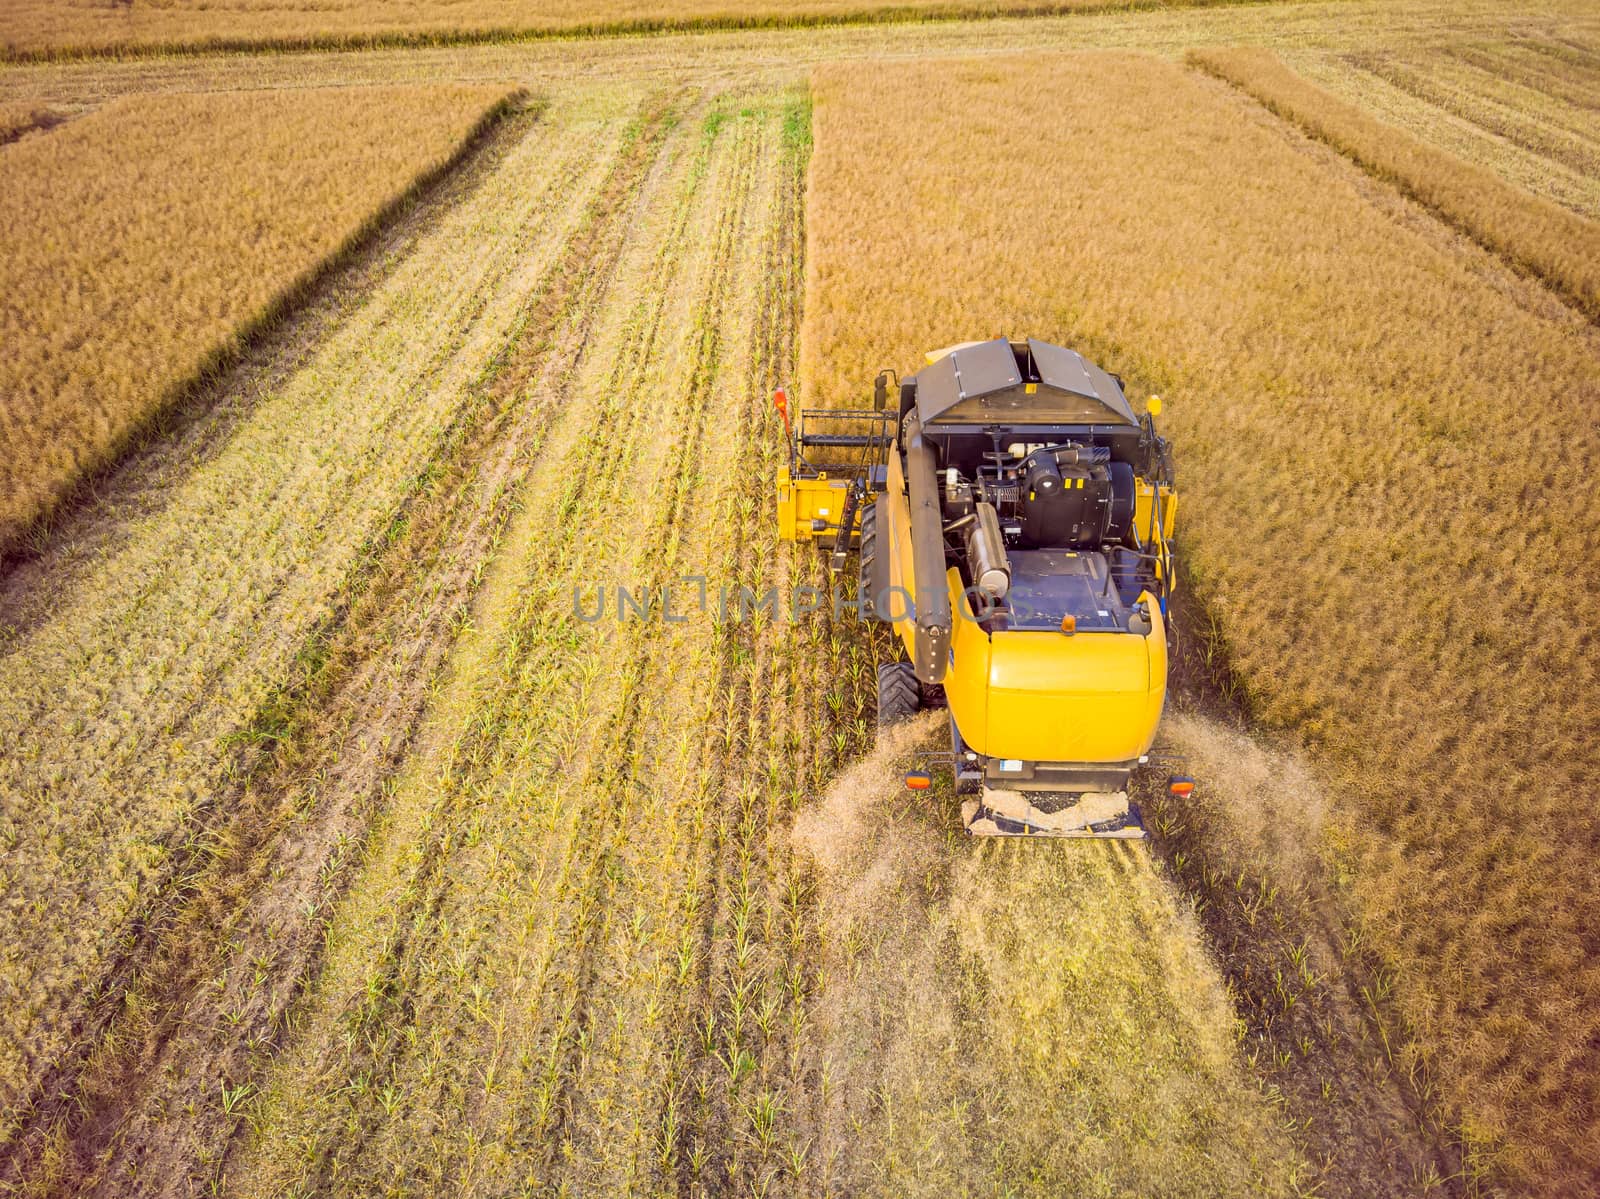 Combine Harvester Working on The Large Wheat Field. Aerial View of Combine Harvester.